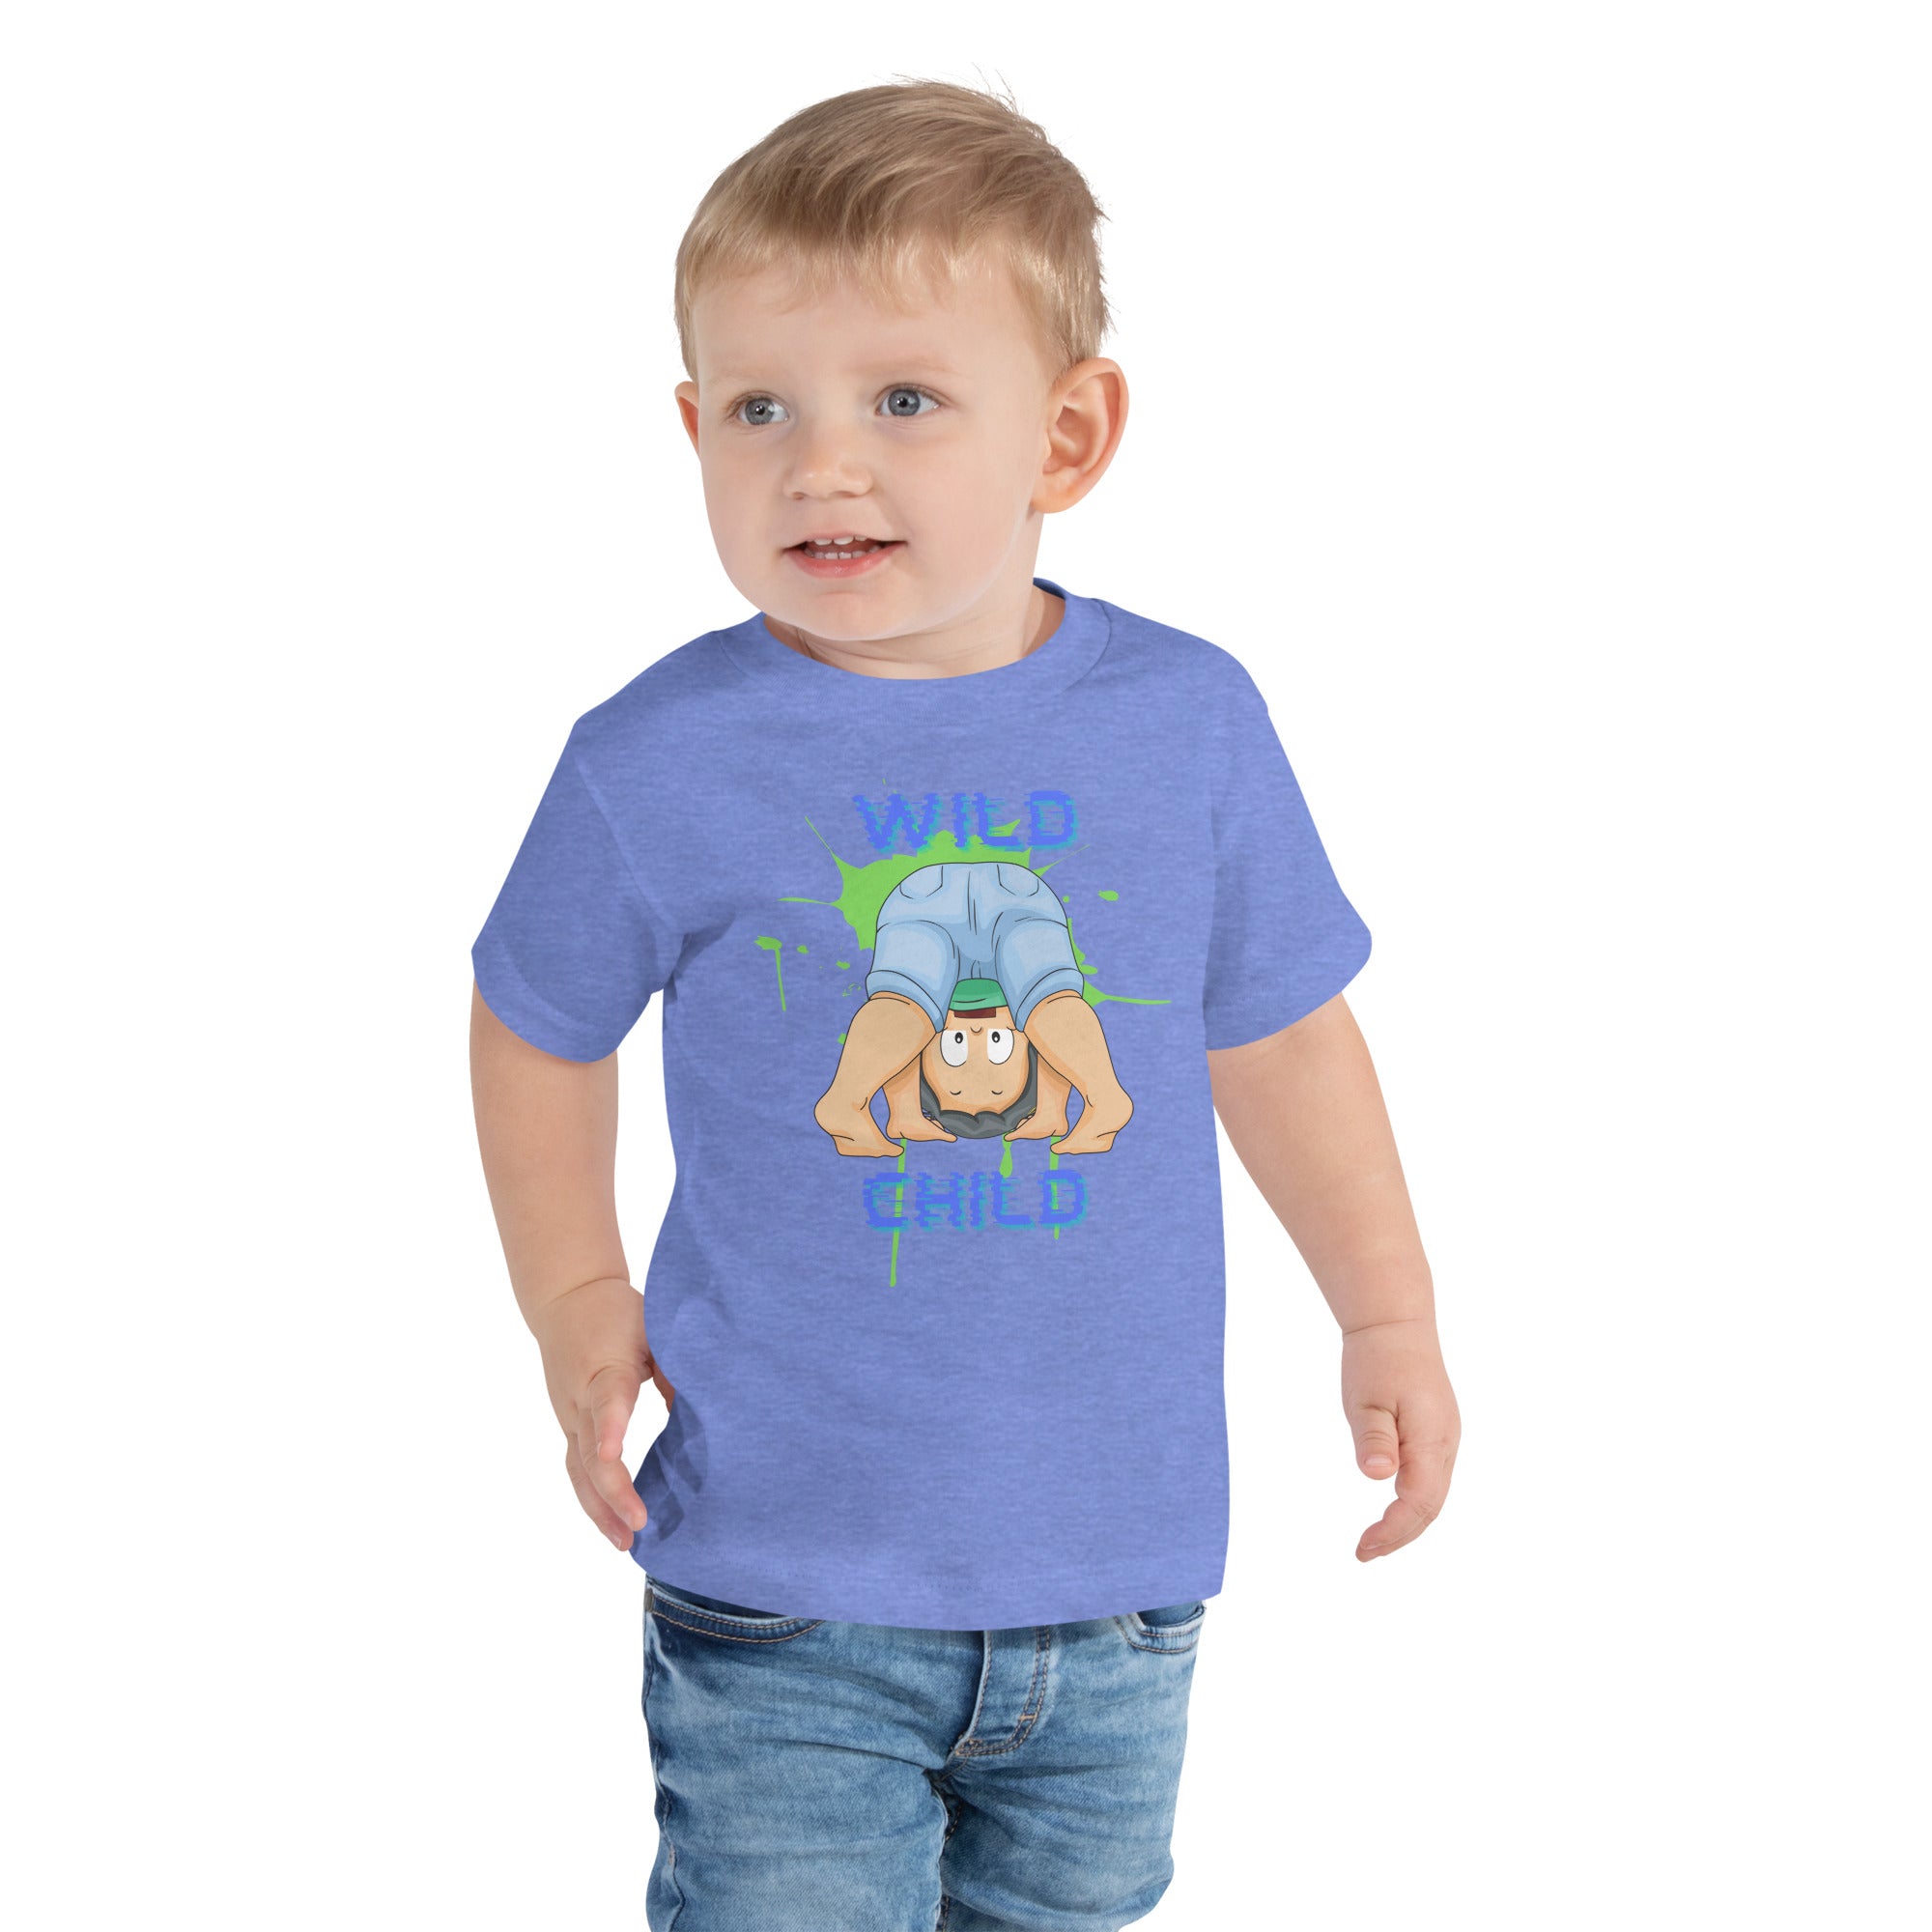 Toddler Short Sleeve Tee - Wild Child (Colors)